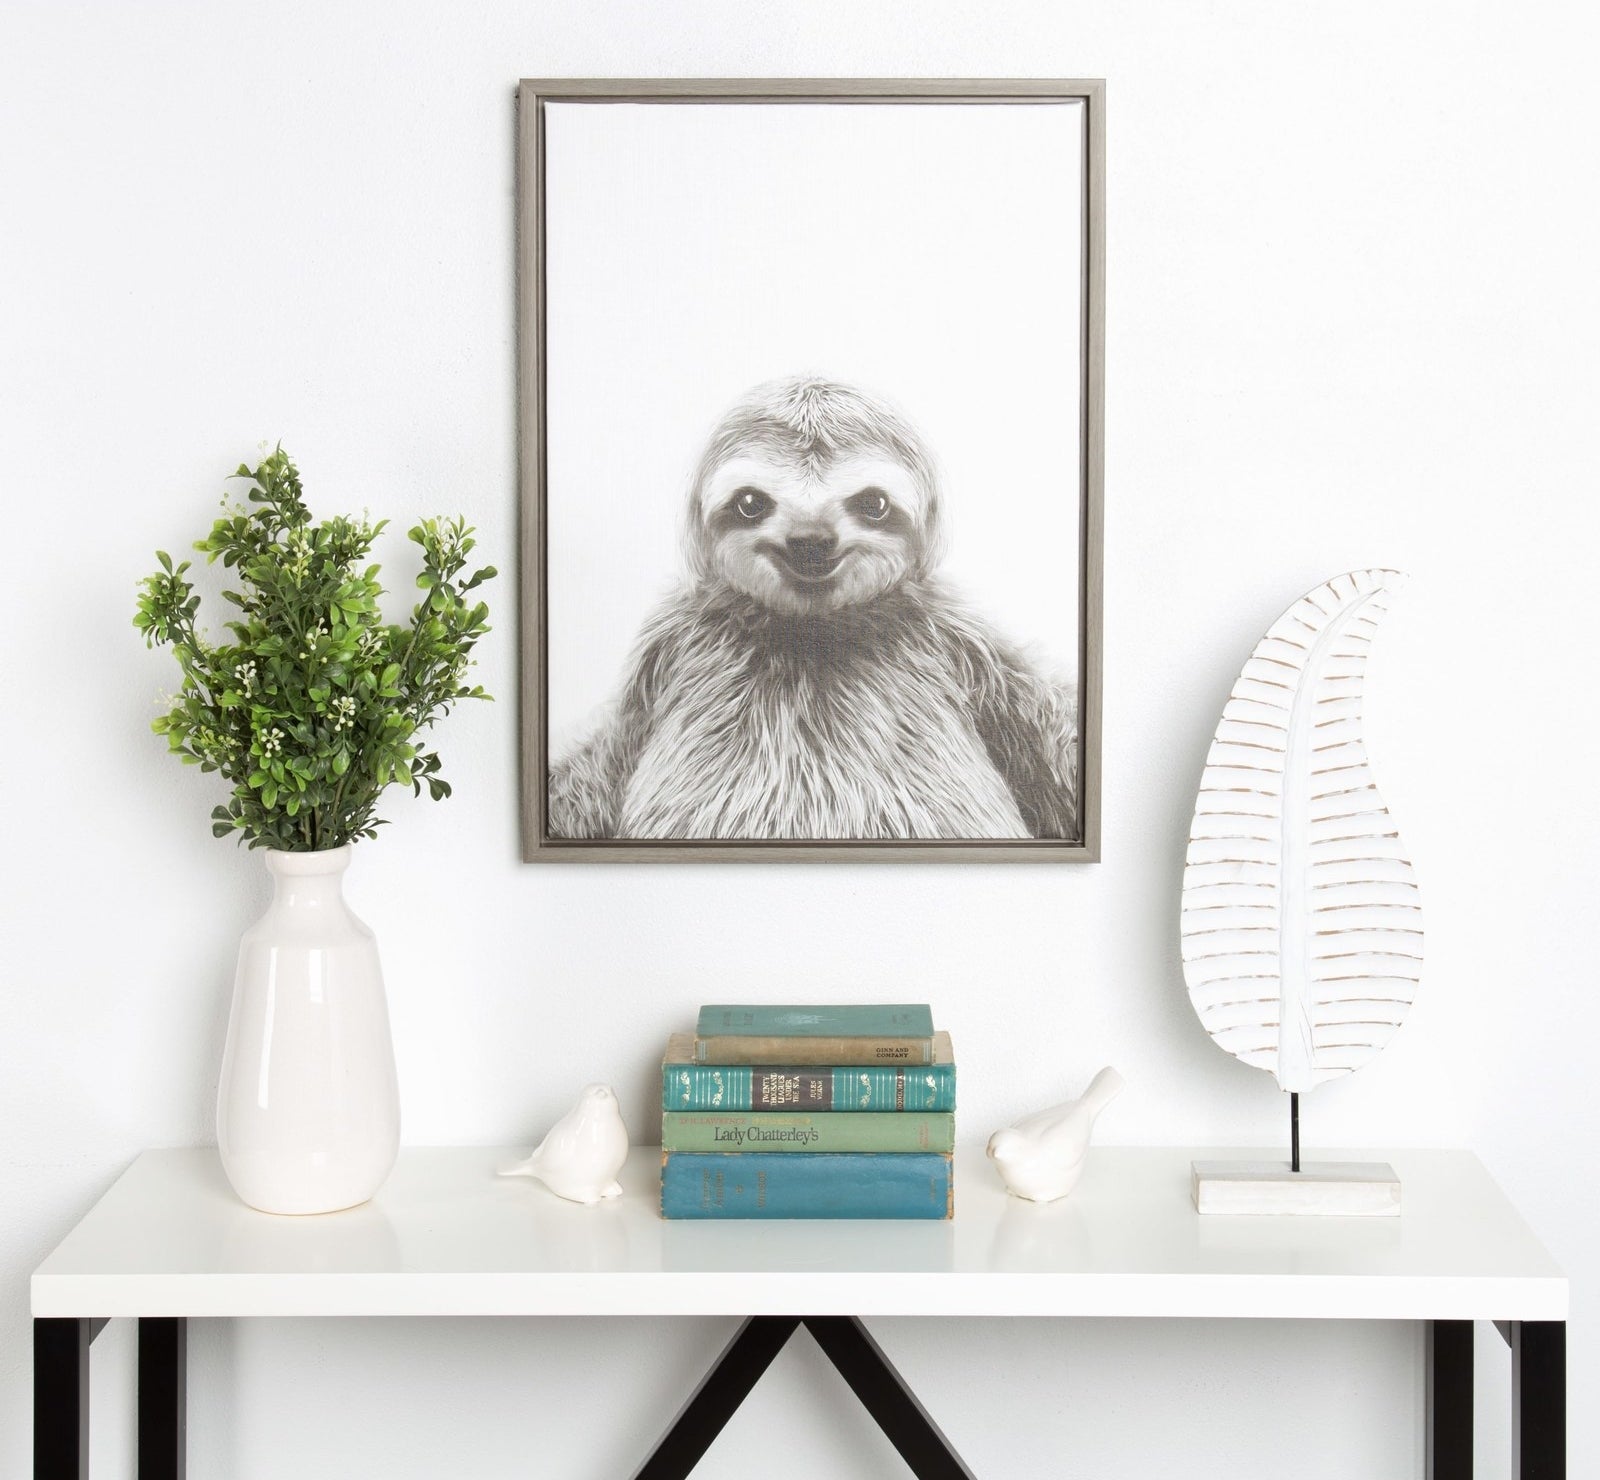 33 Things From Overstock People Love Having In Their Homes